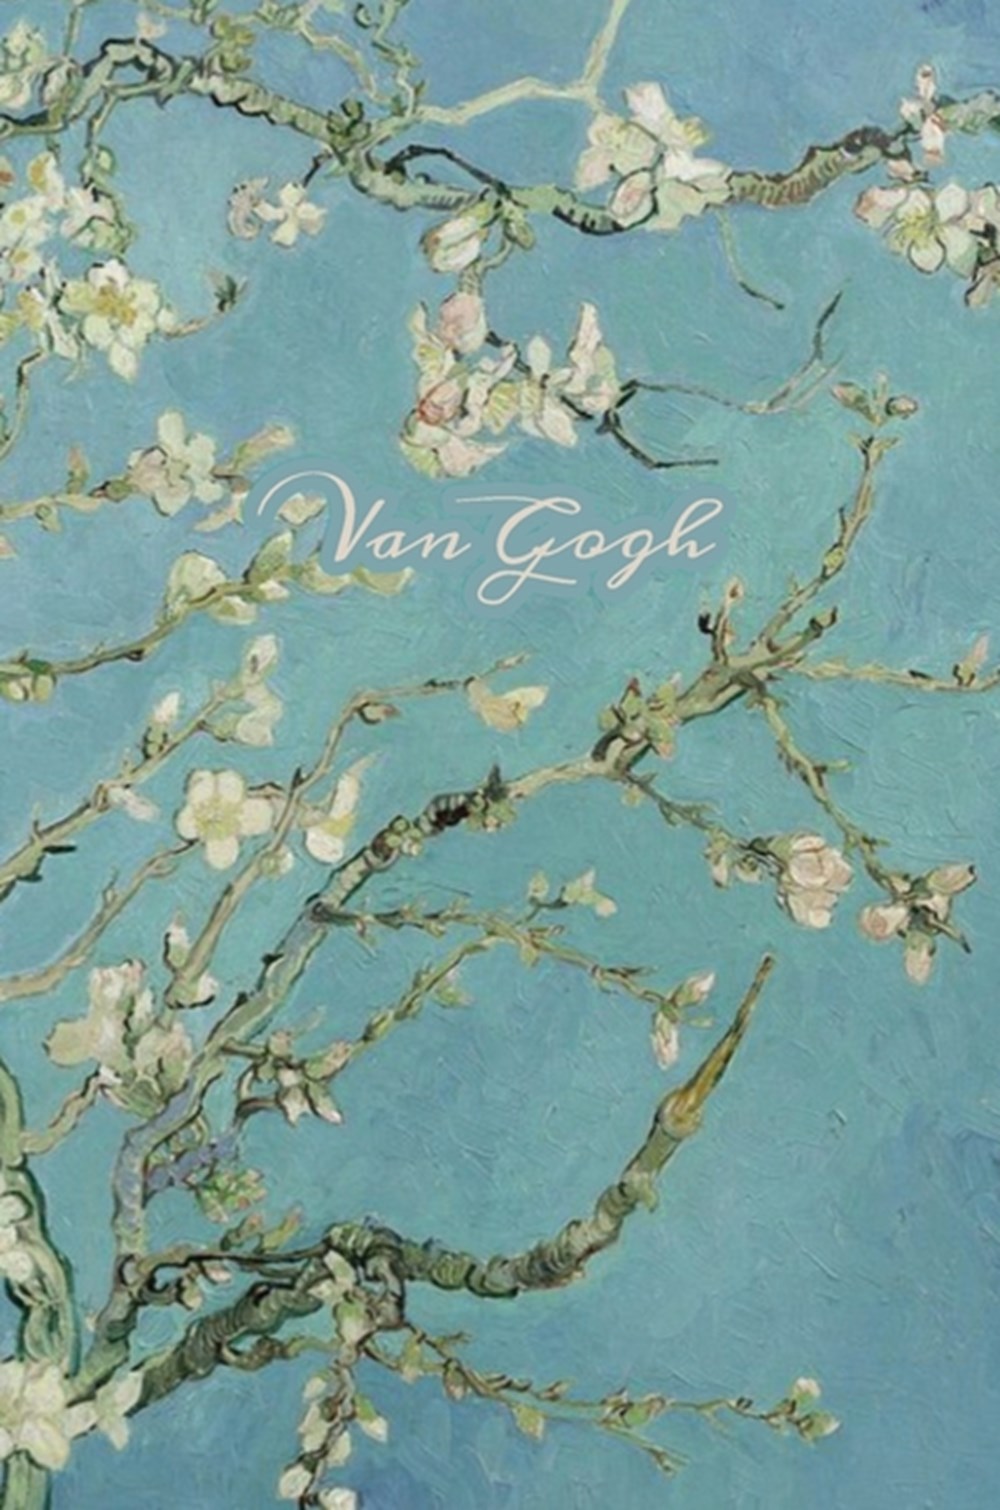 Van Gogh: Almond Blossoms, Hardcover Journal Writing Notebook Diary with Dotted Grid, Lined, & Blank